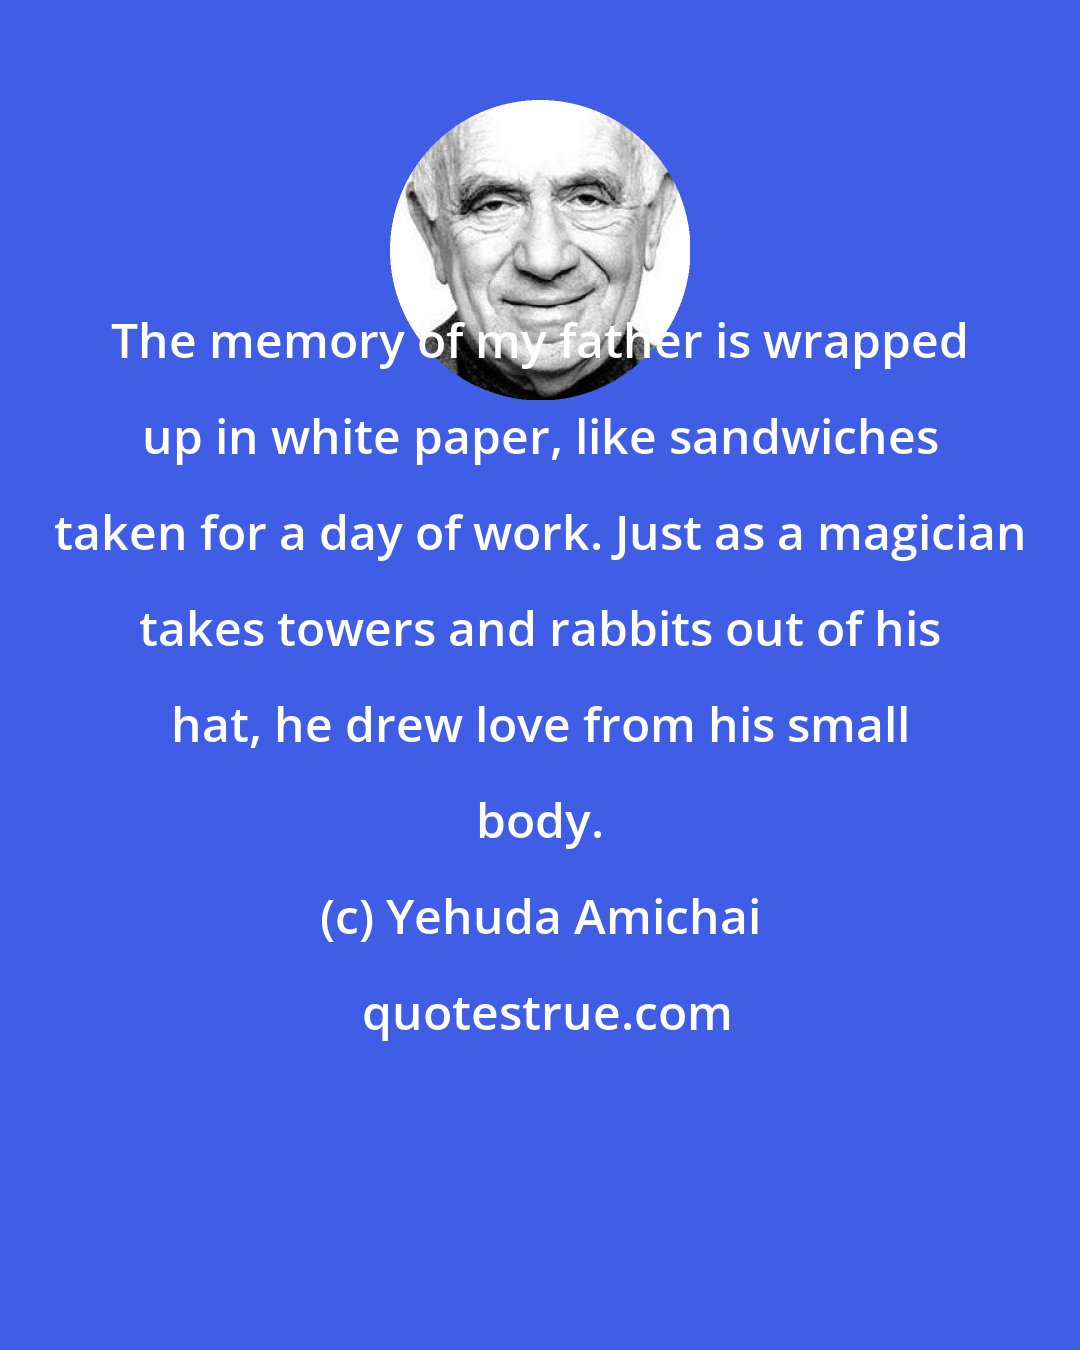 Yehuda Amichai: The memory of my father is wrapped up in white paper, like sandwiches taken for a day of work. Just as a magician takes towers and rabbits out of his hat, he drew love from his small body.